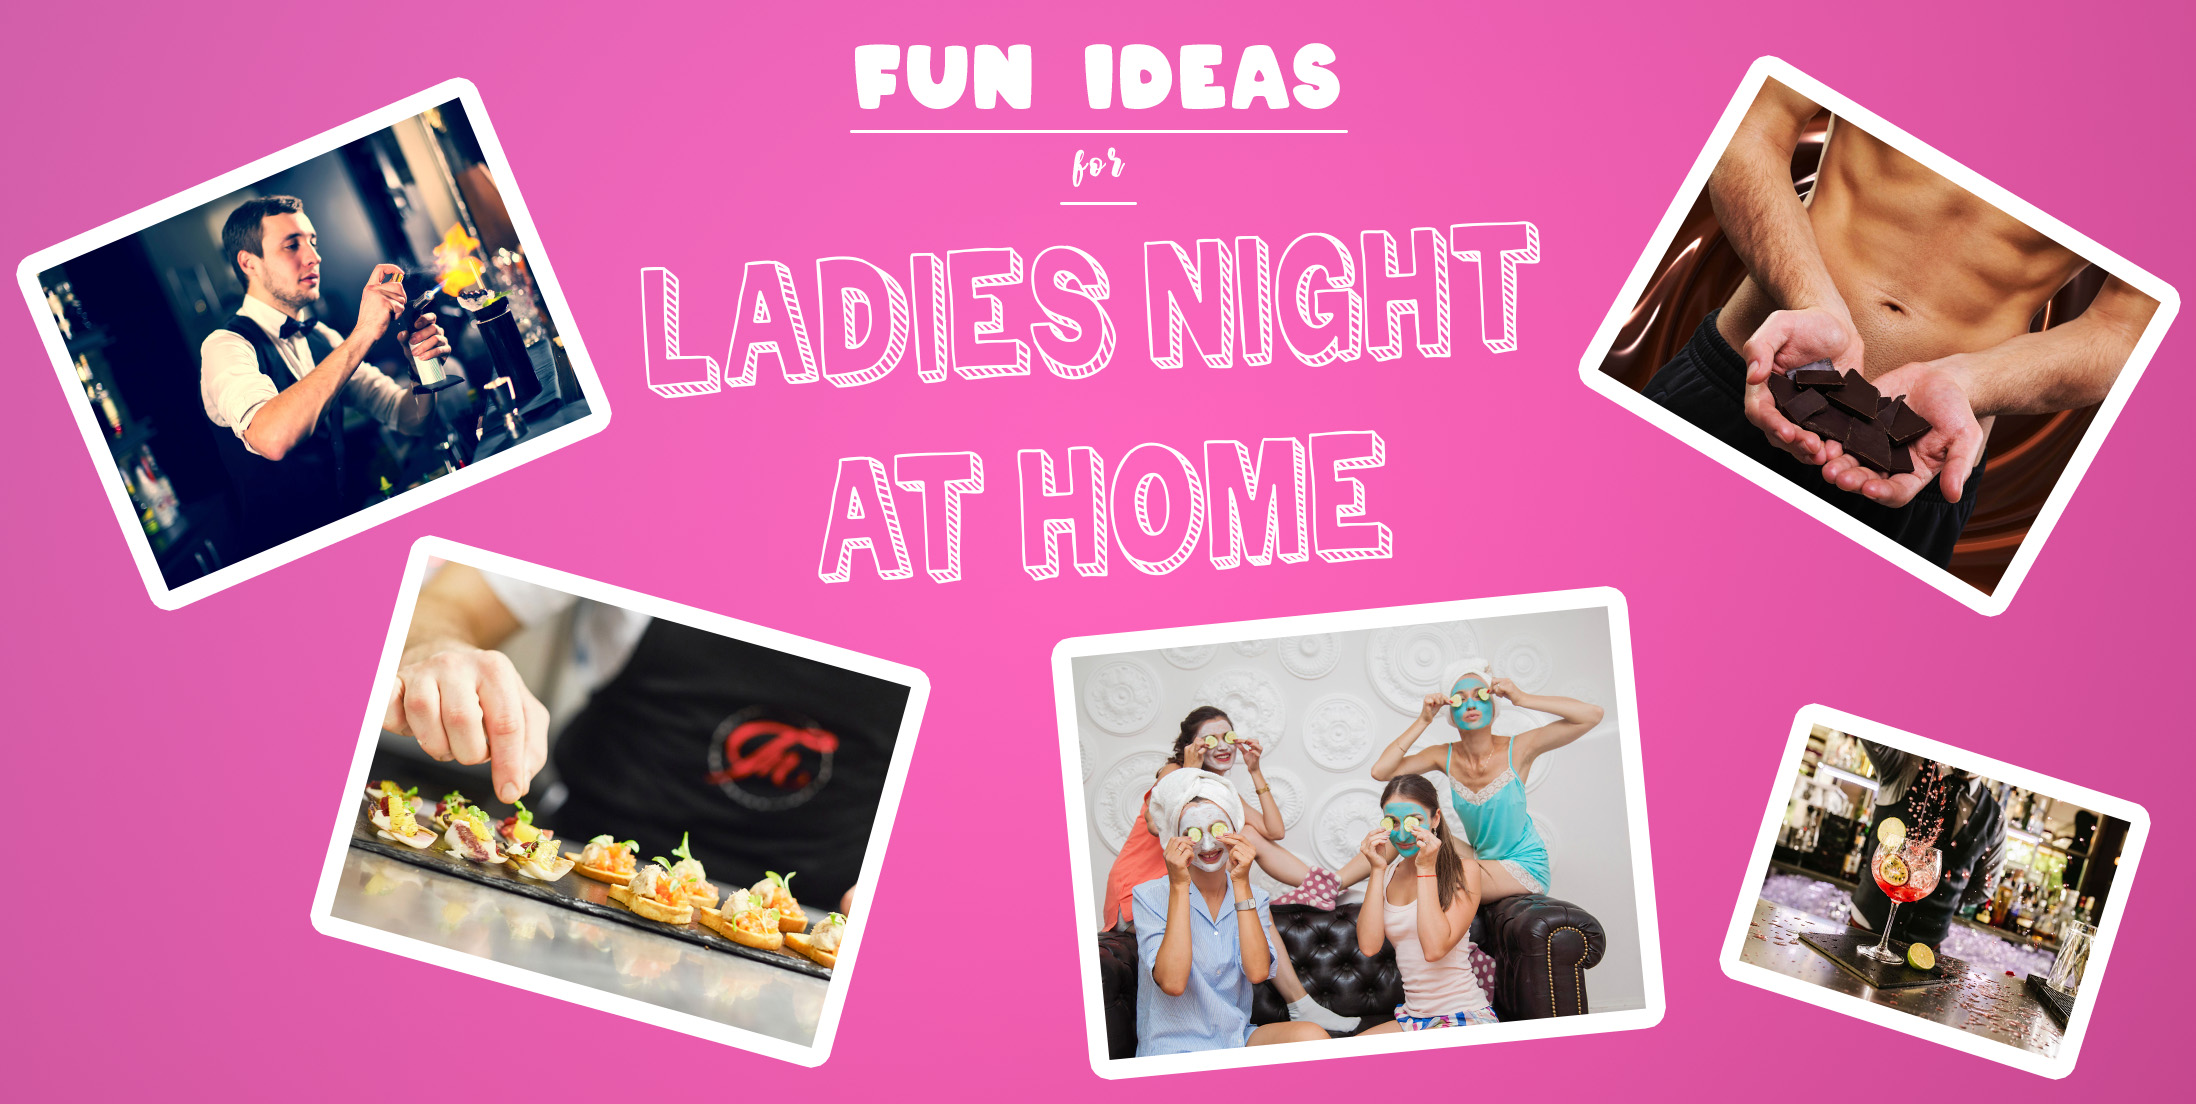 Fun Ideas for Ladies Night at Home